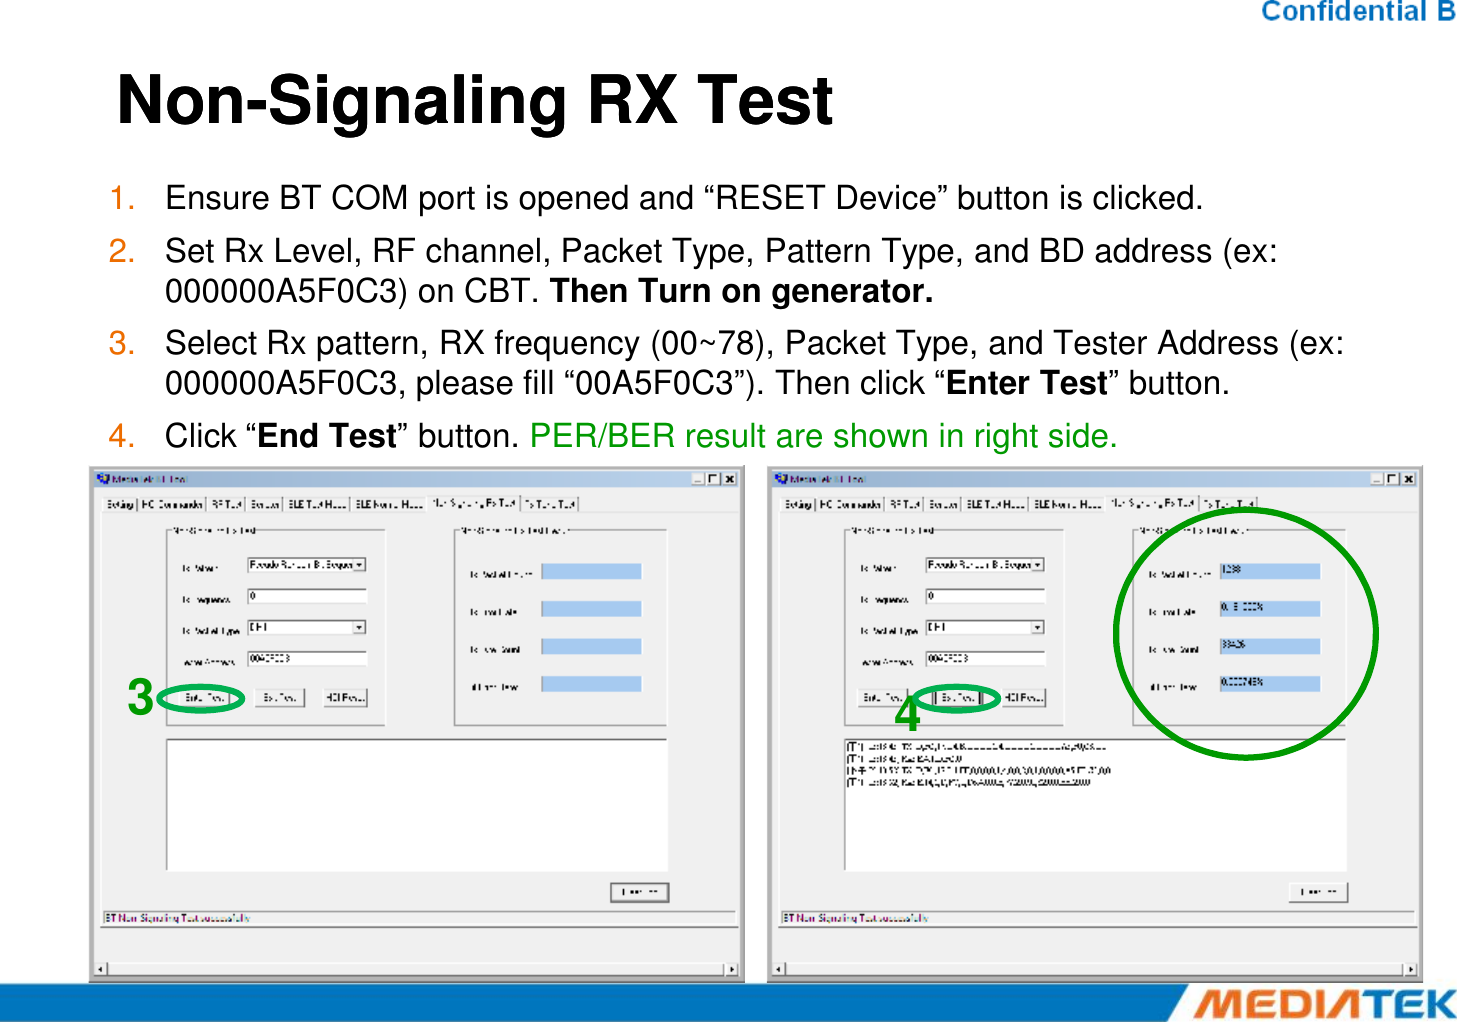 NonNon--Signaling Signaling RX TestRX Test1. Ensure BT COM port is opened and “RESET Device” button is clicked.2. Set Rx Level, RF channel, Packet Type, Pattern Type, and BD address (ex: 000000A5F0C3) on CBT. Then Turn on generator.3. Select Rx pattern, RX frequency (00~78), Packet Type, and Tester Address (ex: 000000A5F0C3, please fill “00A5F0C3”). Then click “Enter Test” button.4. Click “End Test” button. PER/BER result are shown in right side.34